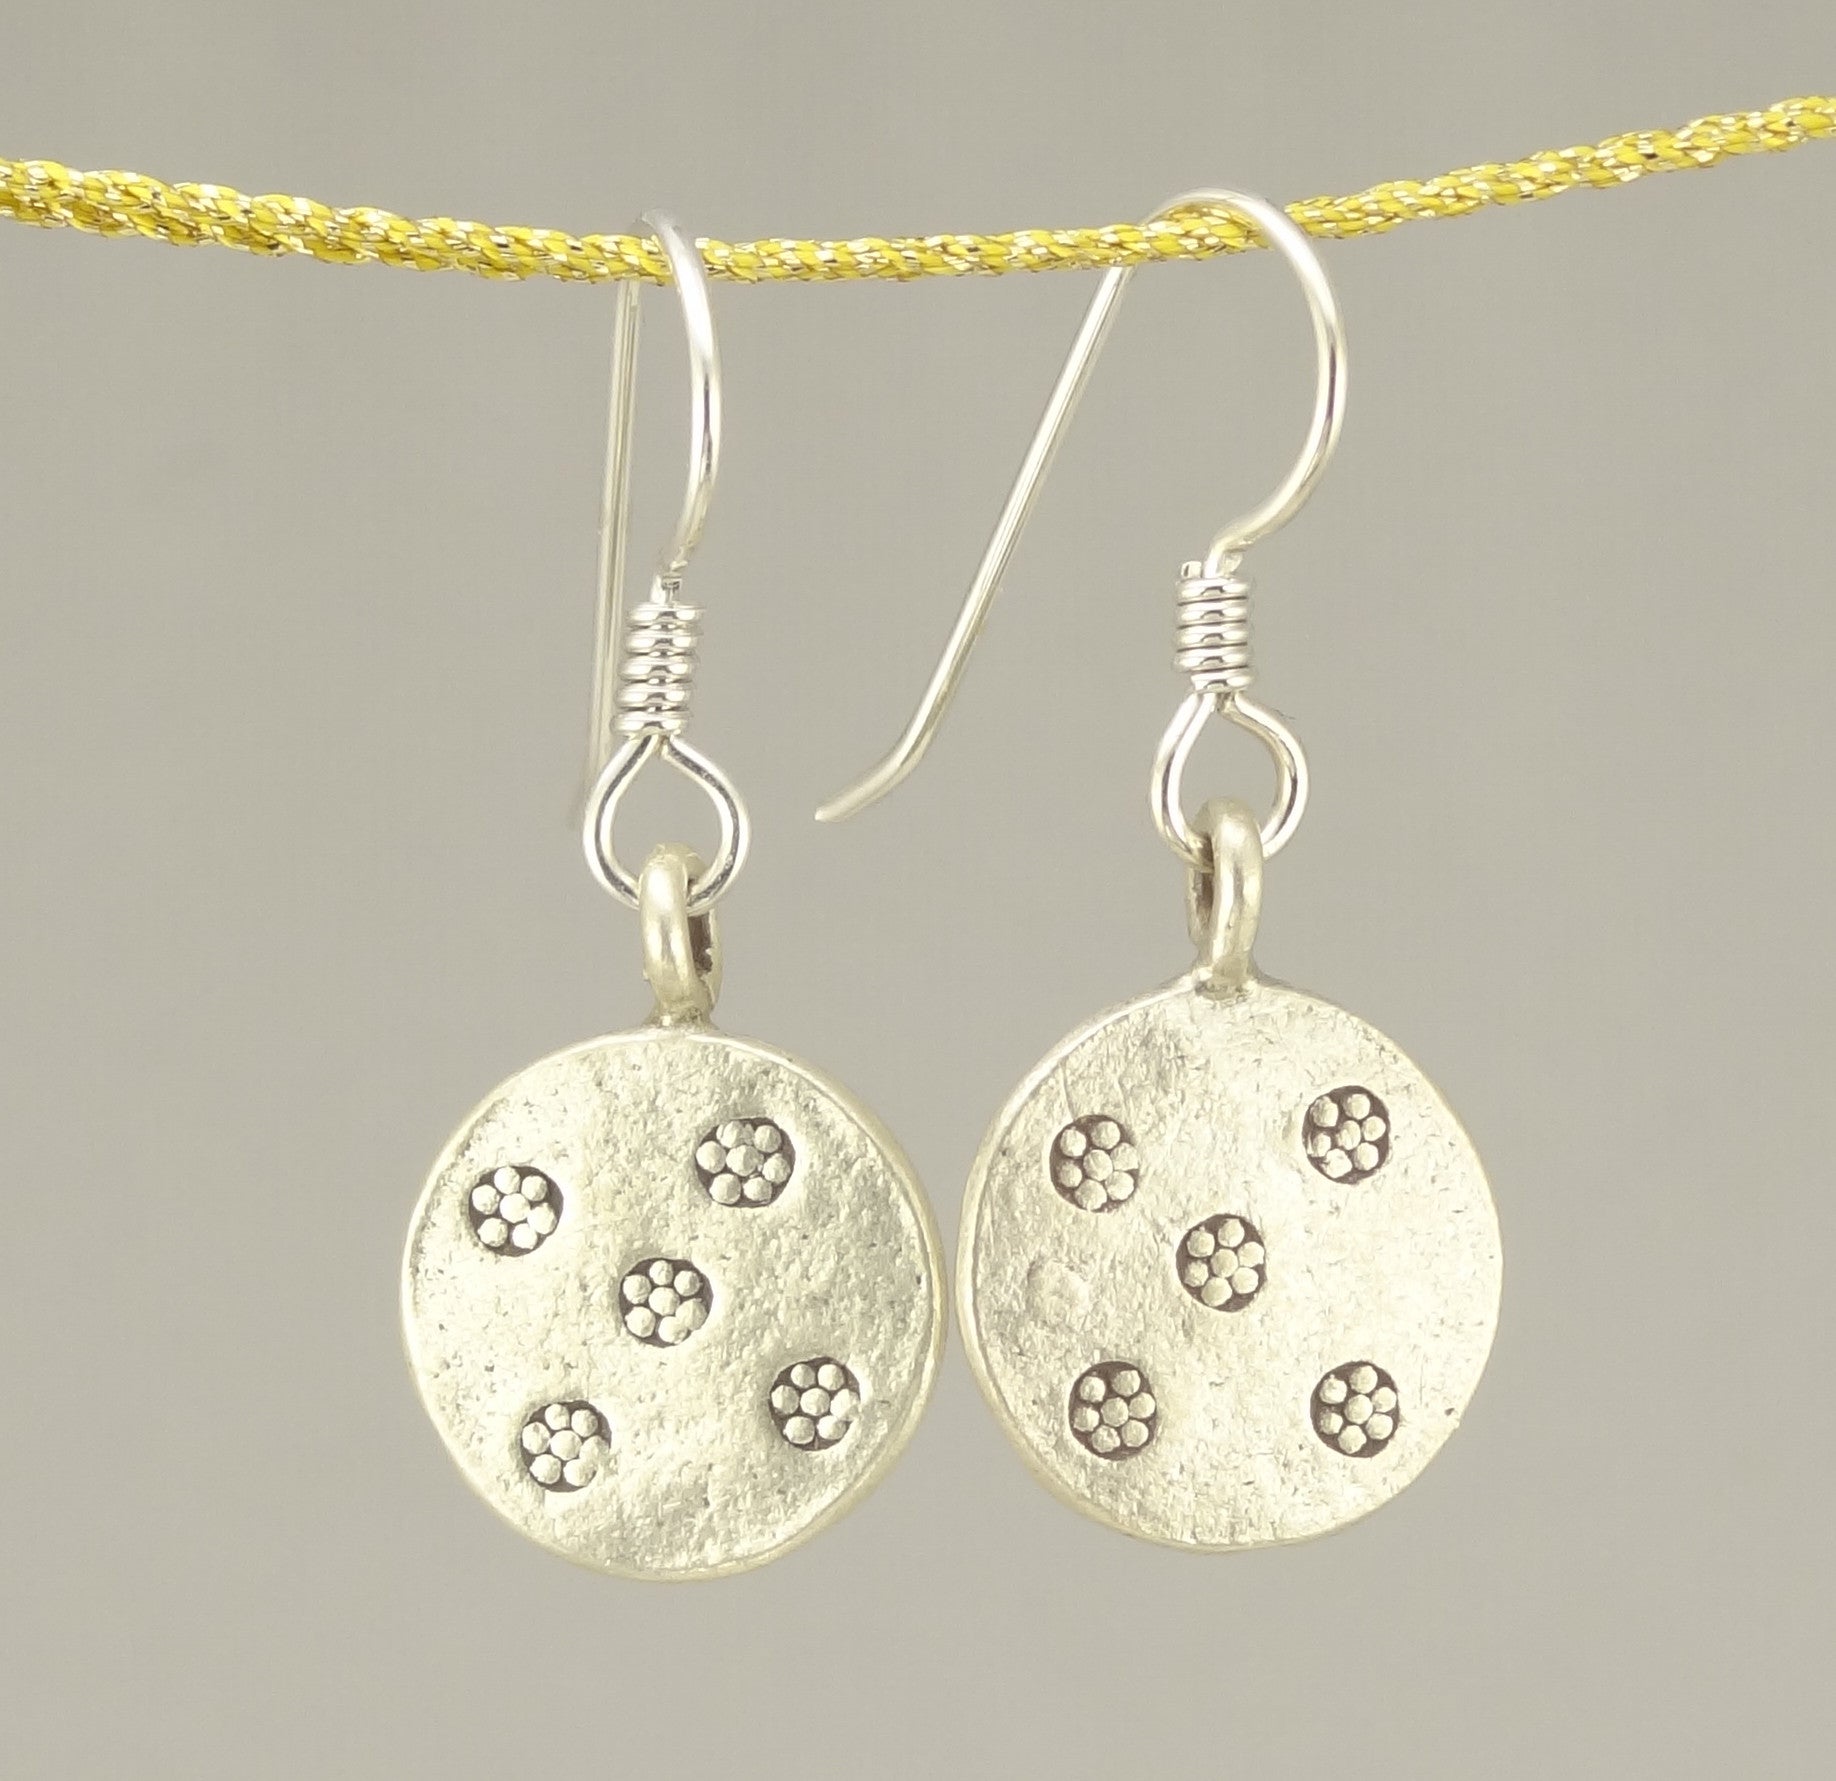 Hill Tribe Silver Stamped Disk Earrings